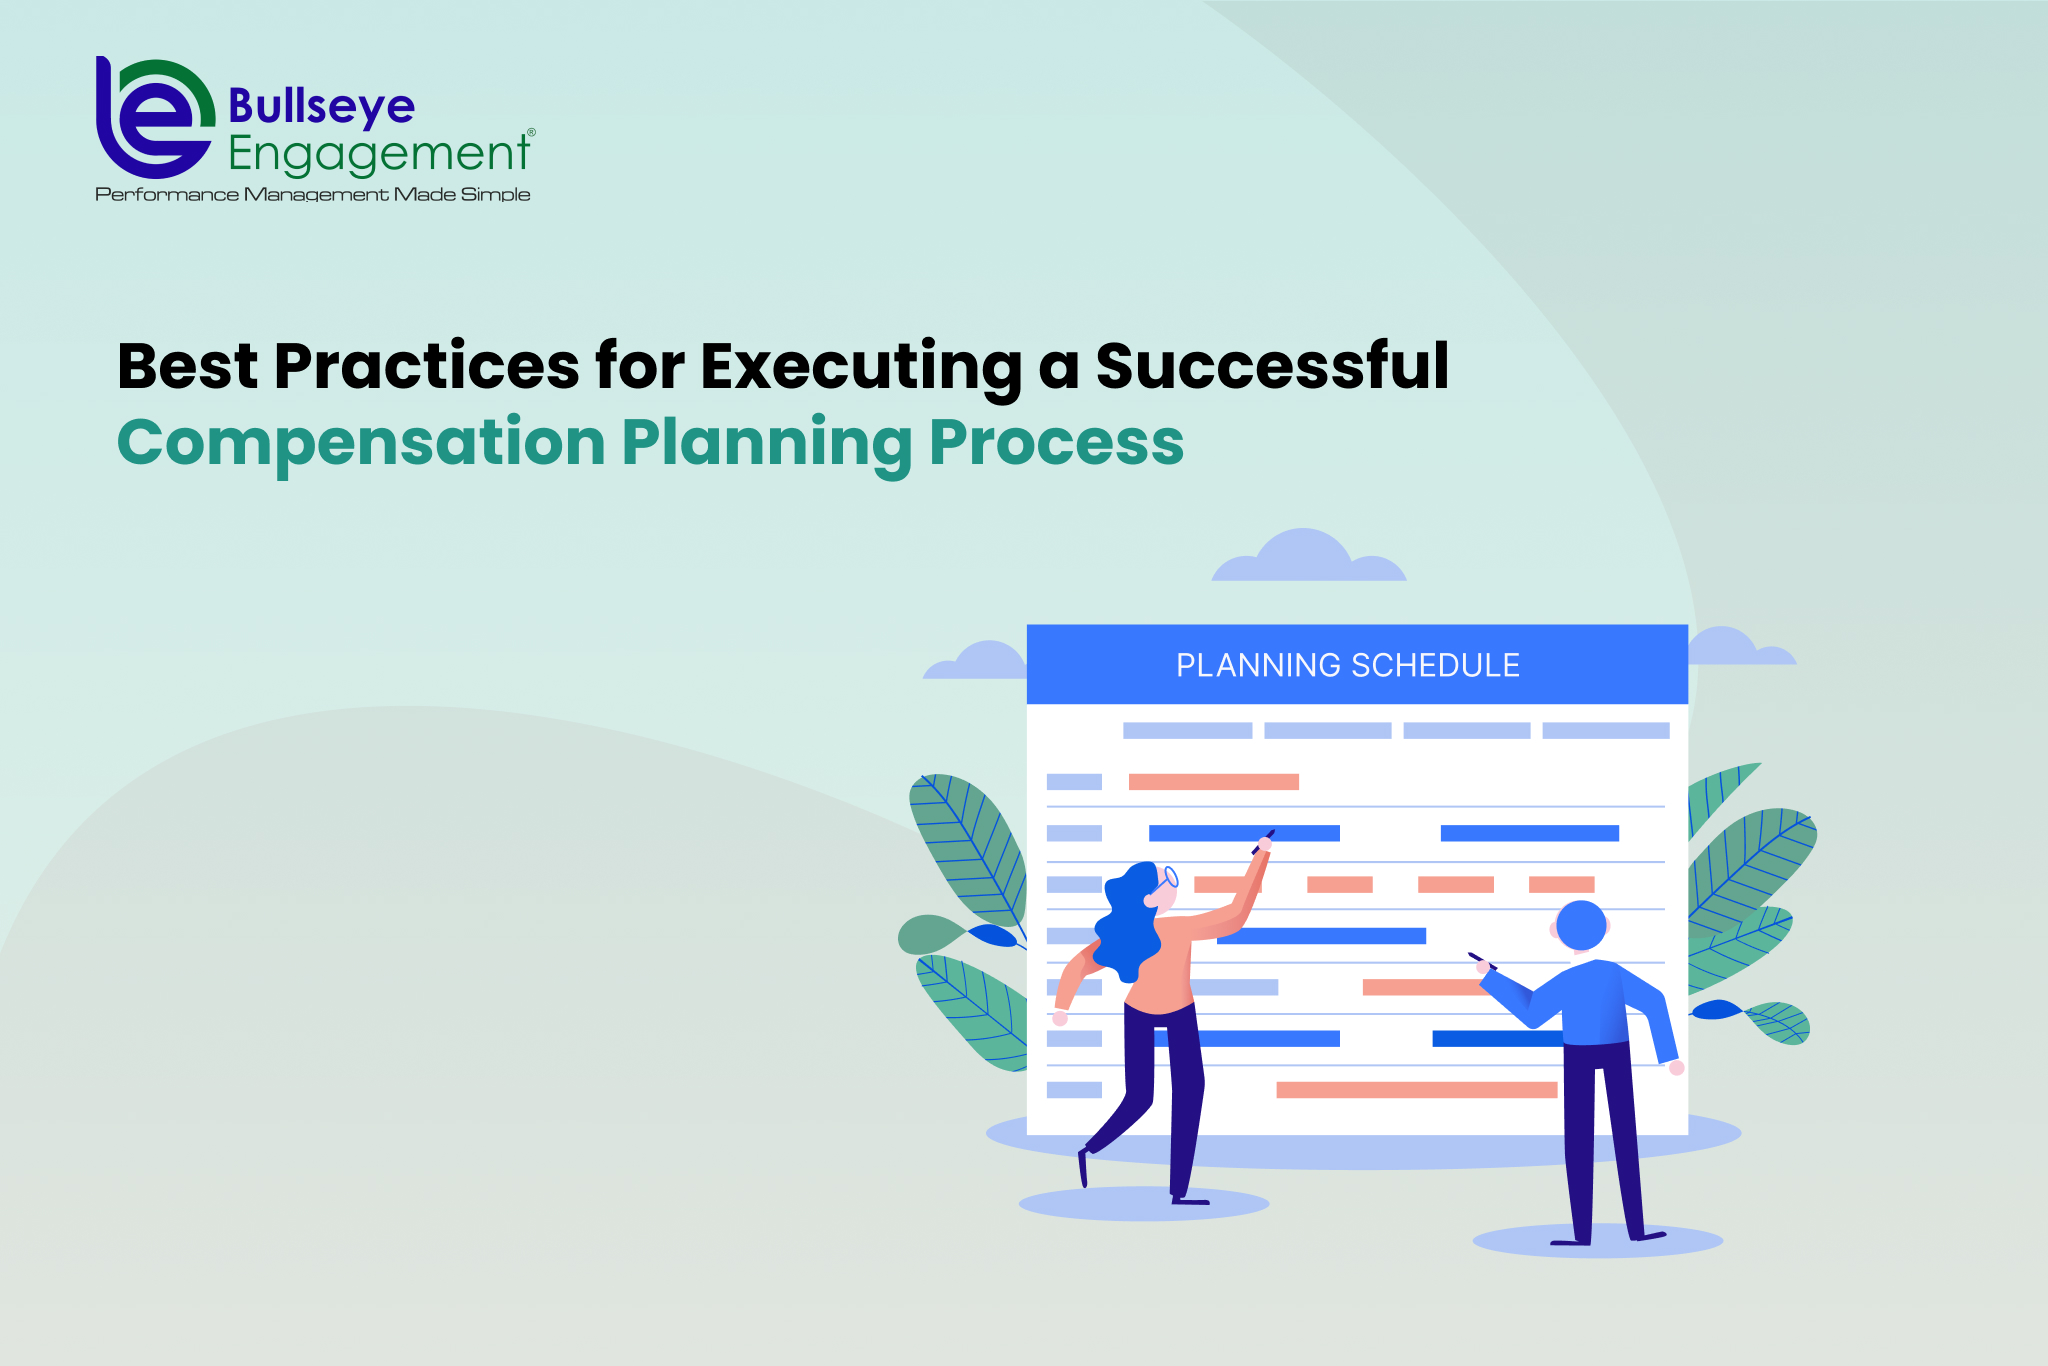 Best Practices for Executing a Successful Compensation Planning Process